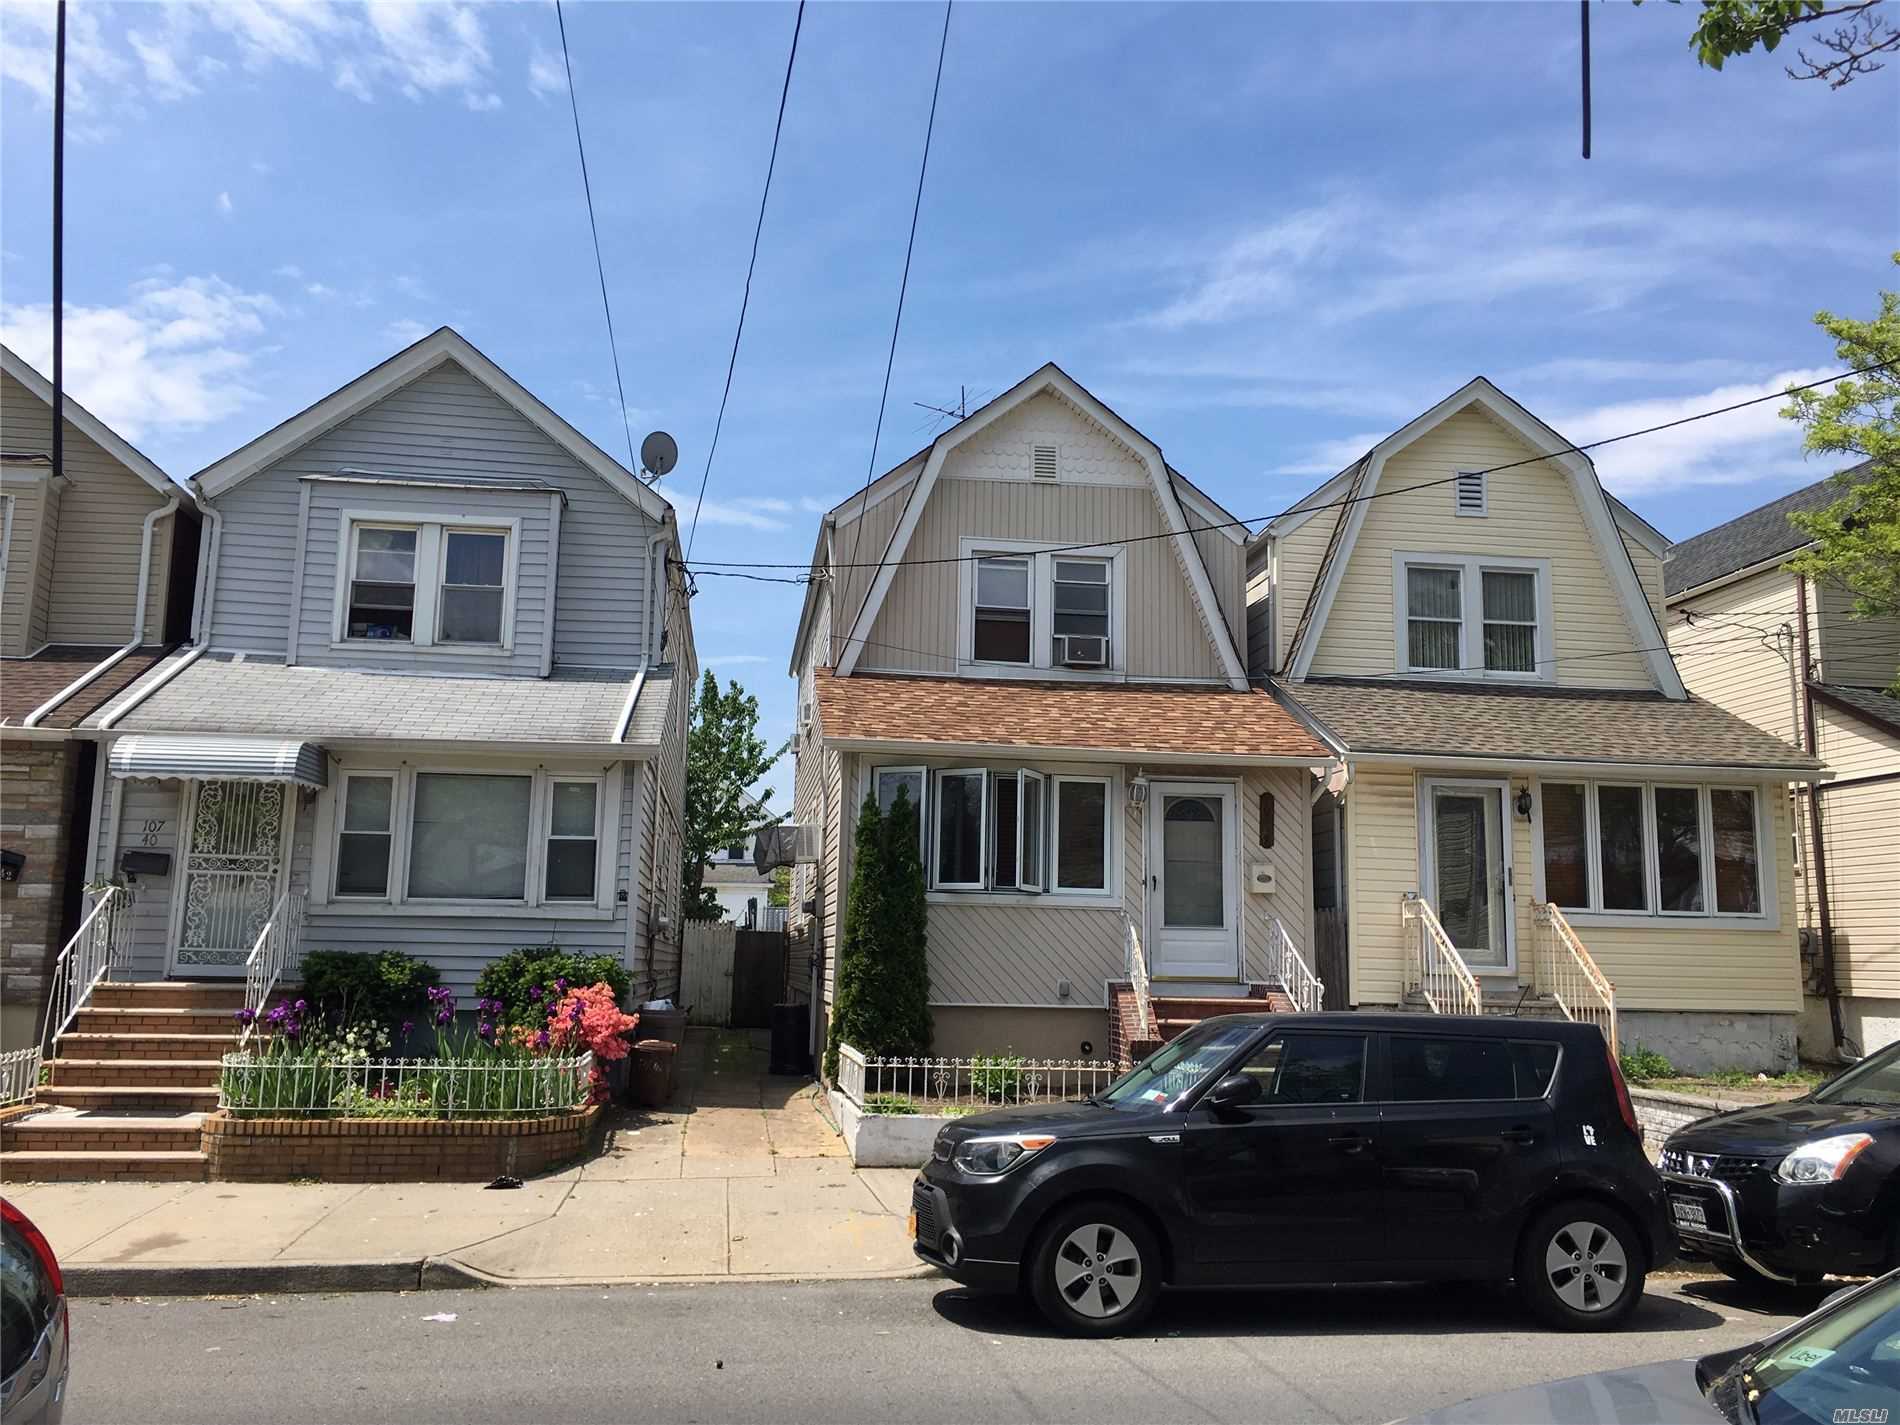 DETACHED SINGLE FAMILY IN OZONE PARK . FEATURE 3 BEDROOMS TWO FULL BATHS FORMAL DINING ROOM LARGE OPEN LIVING ROOM , EAT IN KITCHEN . Brand new Boiler .ONLY TWO BLOCK TO (A ) TRAIN, 88TH STREET STATION , MAJOR BUS LINES AND SHOPPING ETC..